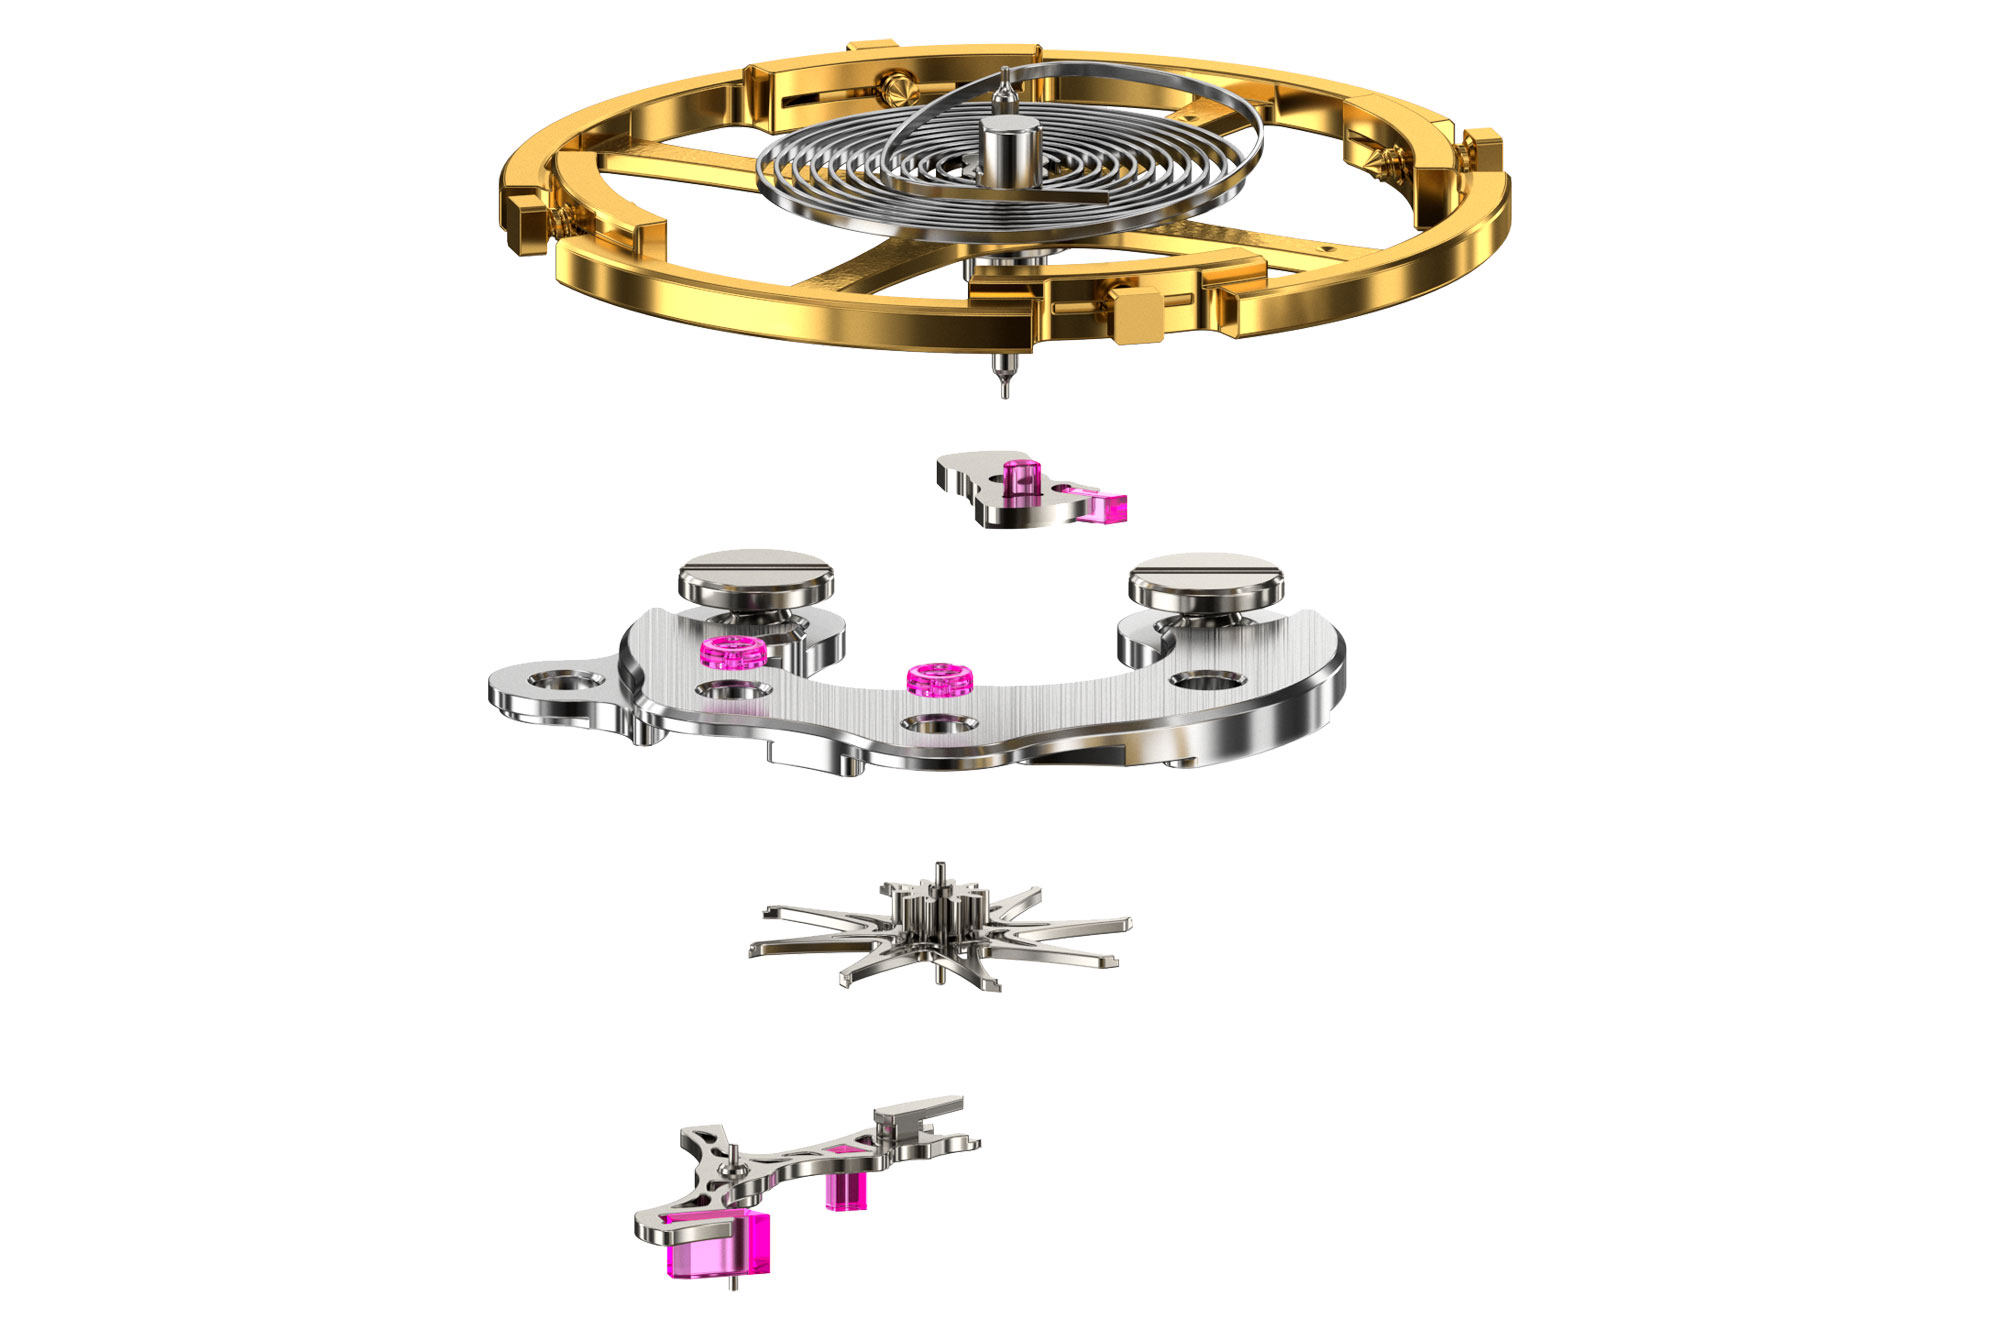 Exploded view of the Grand Seiko Dual Pulse Escapement.